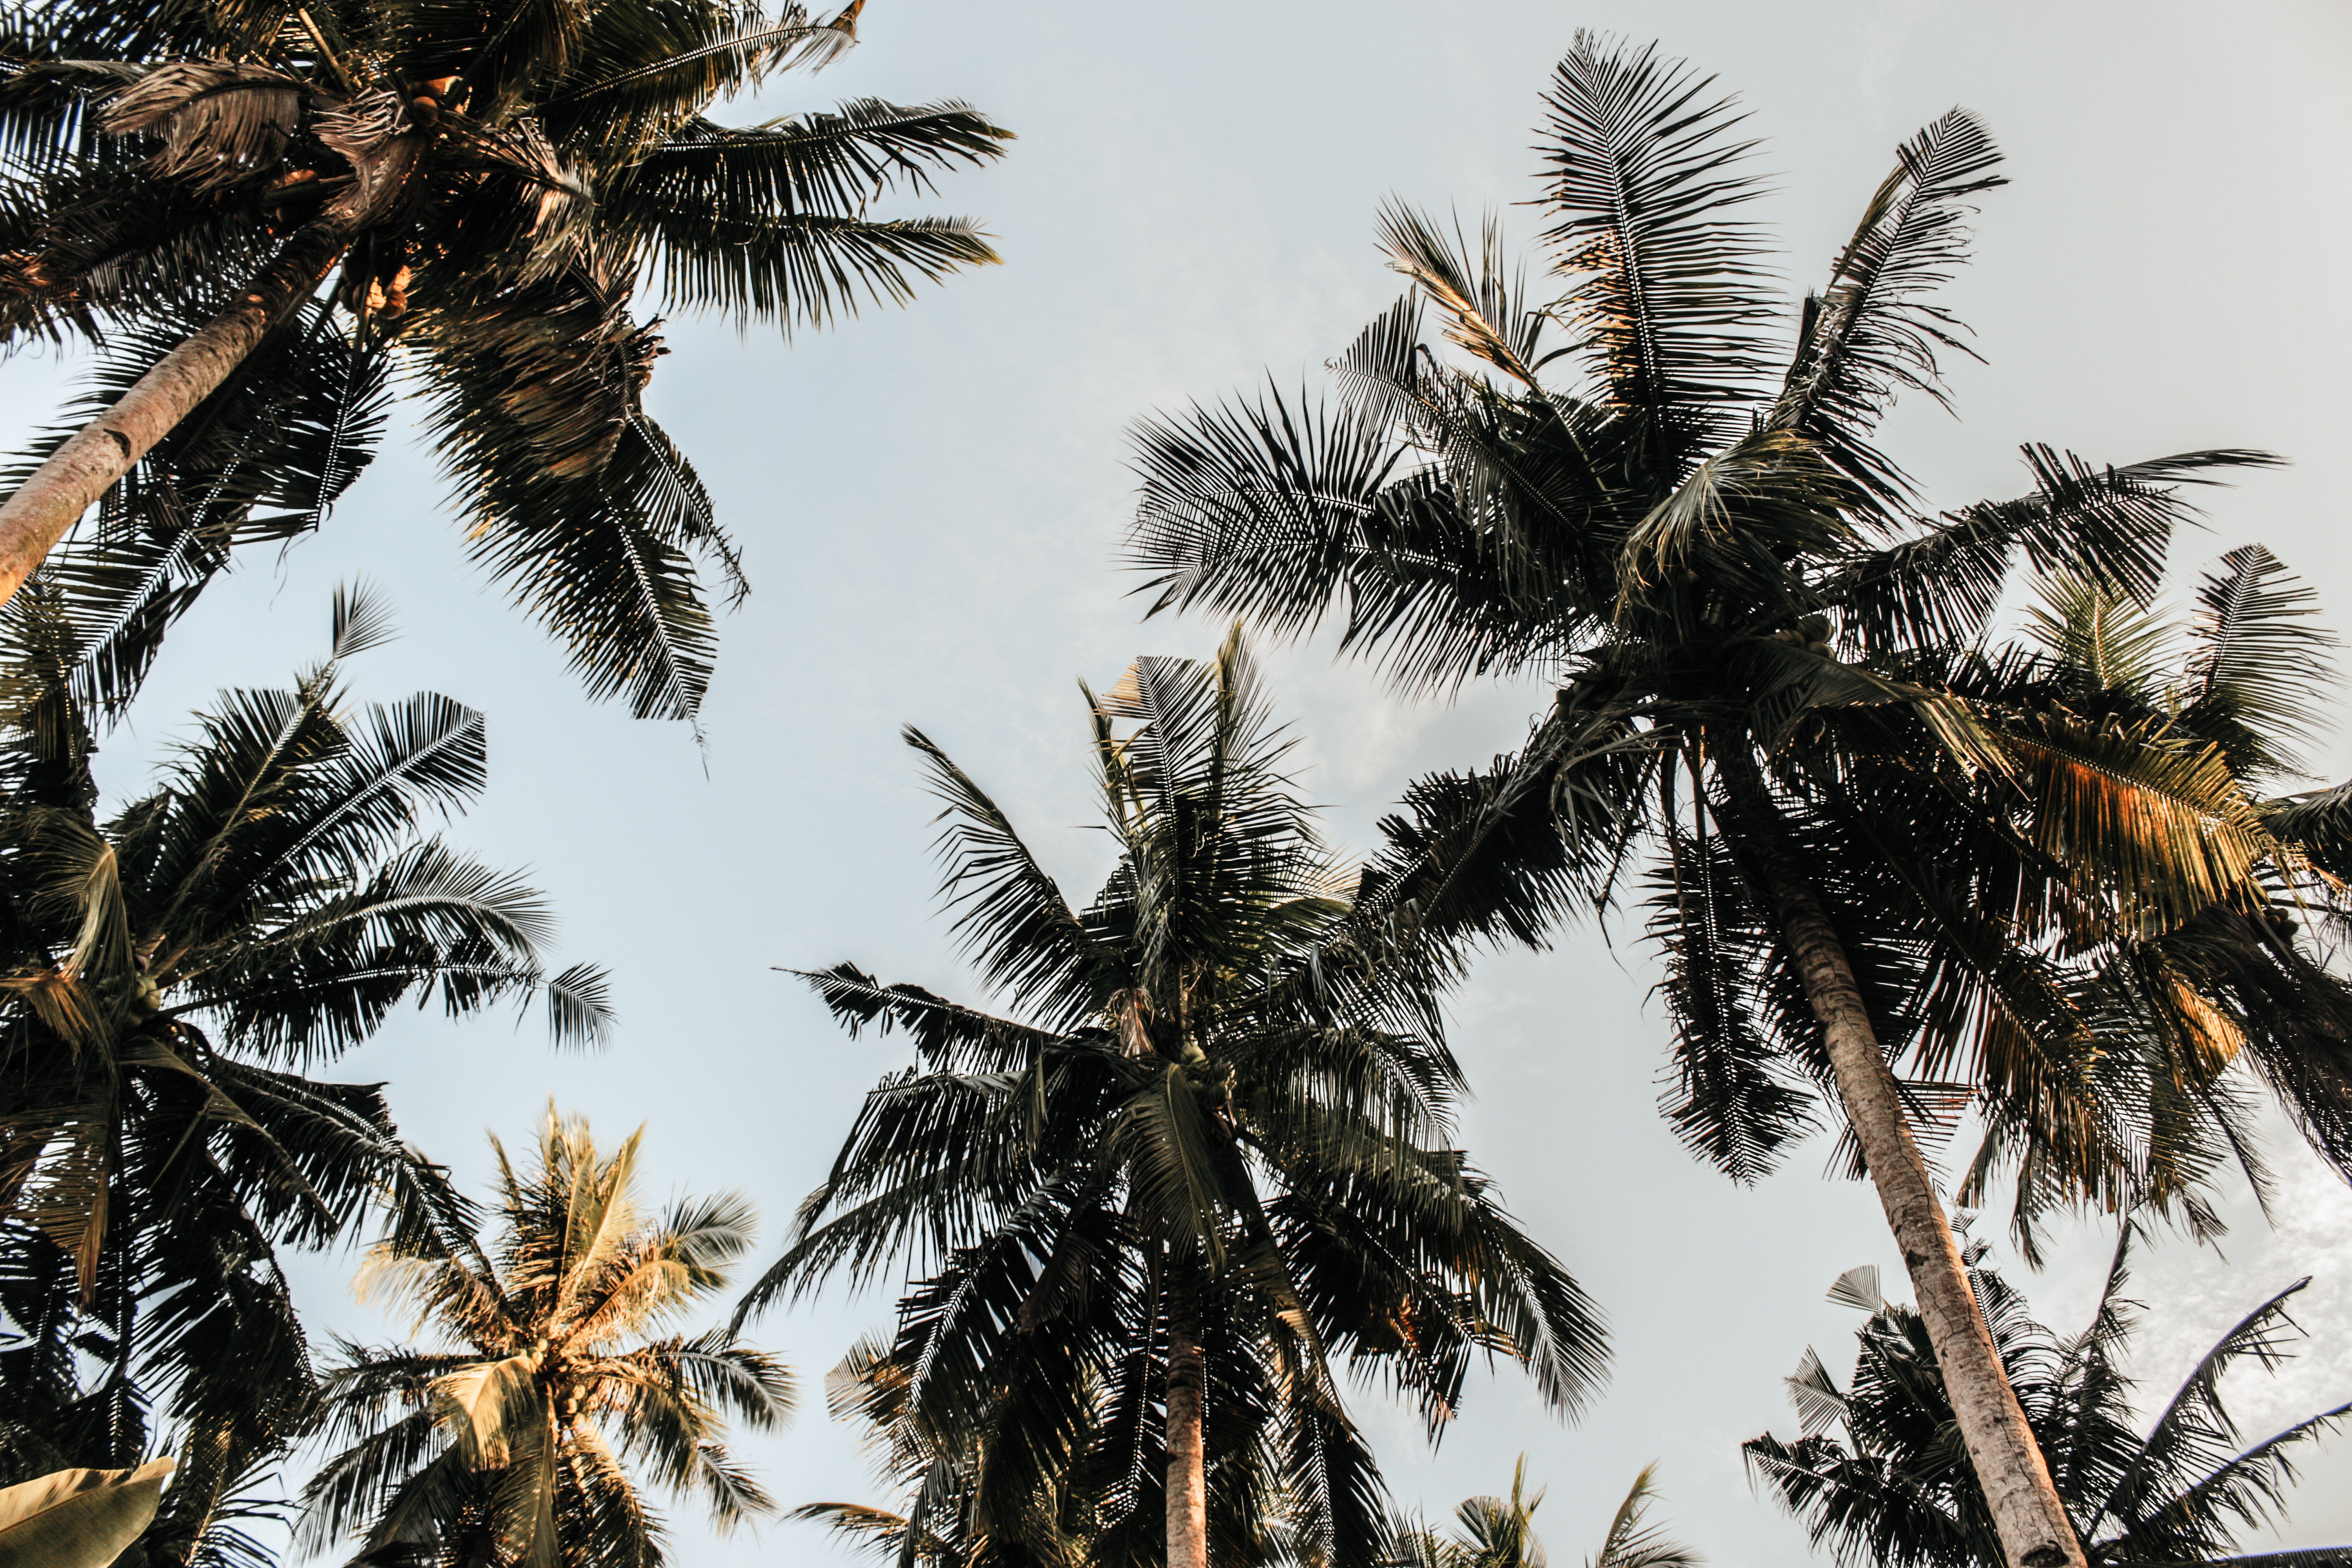 Palm trees photos download free palm trees stock photos hd images